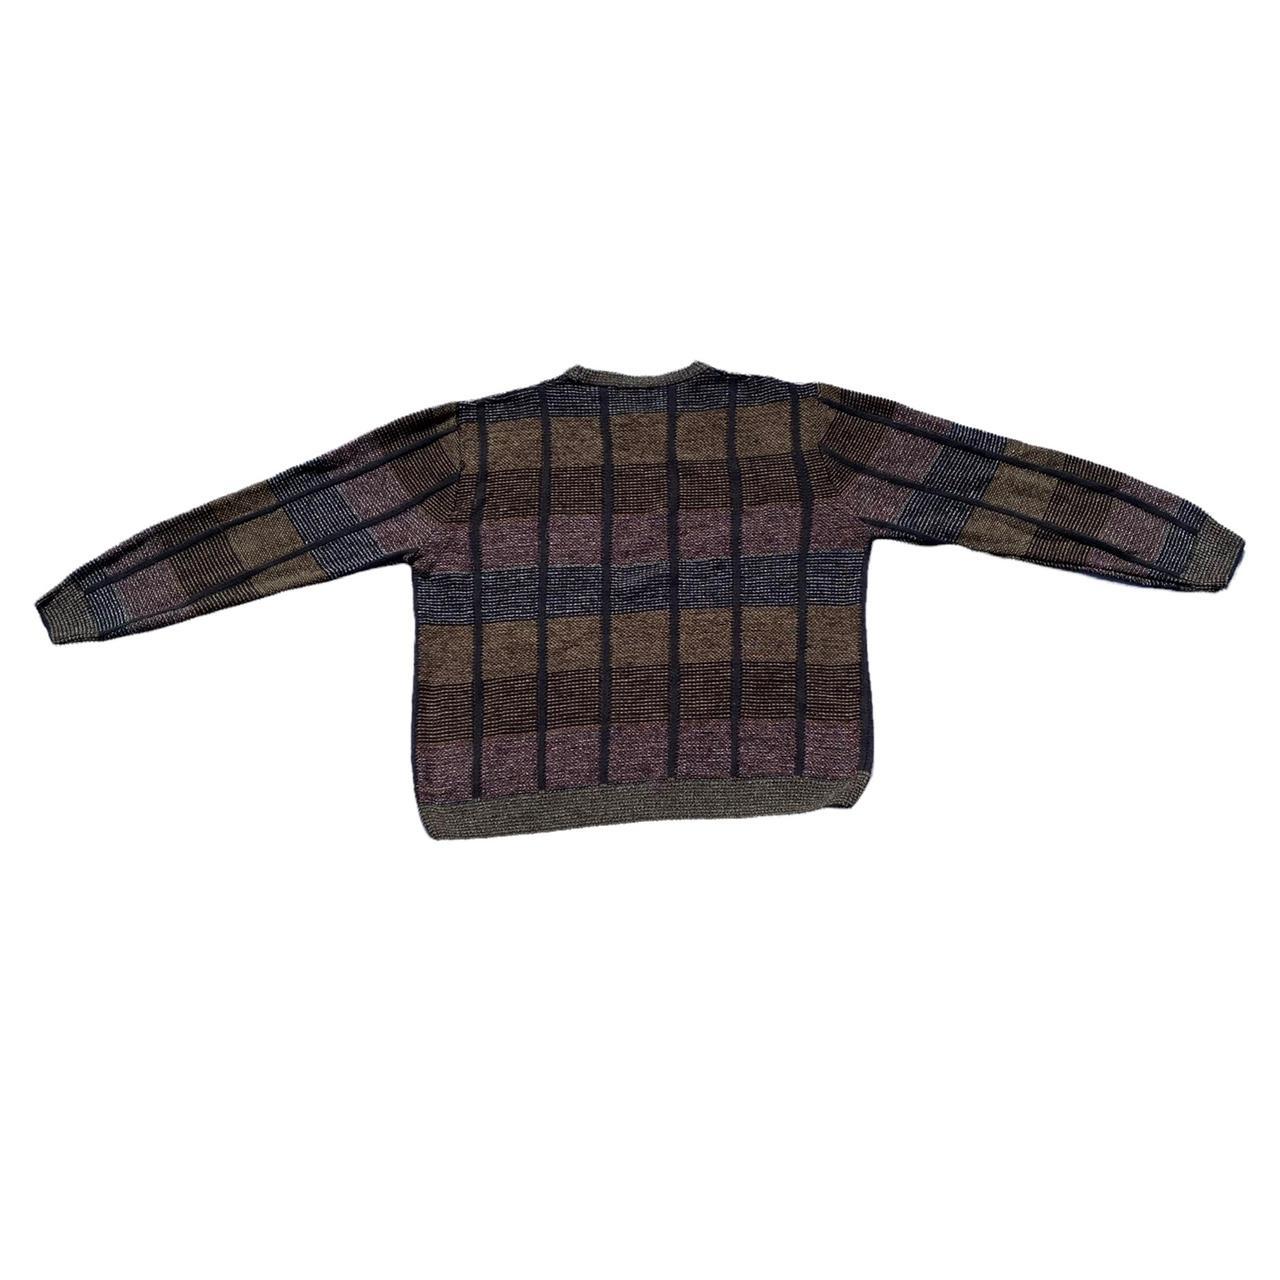 Product Image 2 - Vintage Colorblocking Earthtones Cosby Sweater
Measurements:
Tag